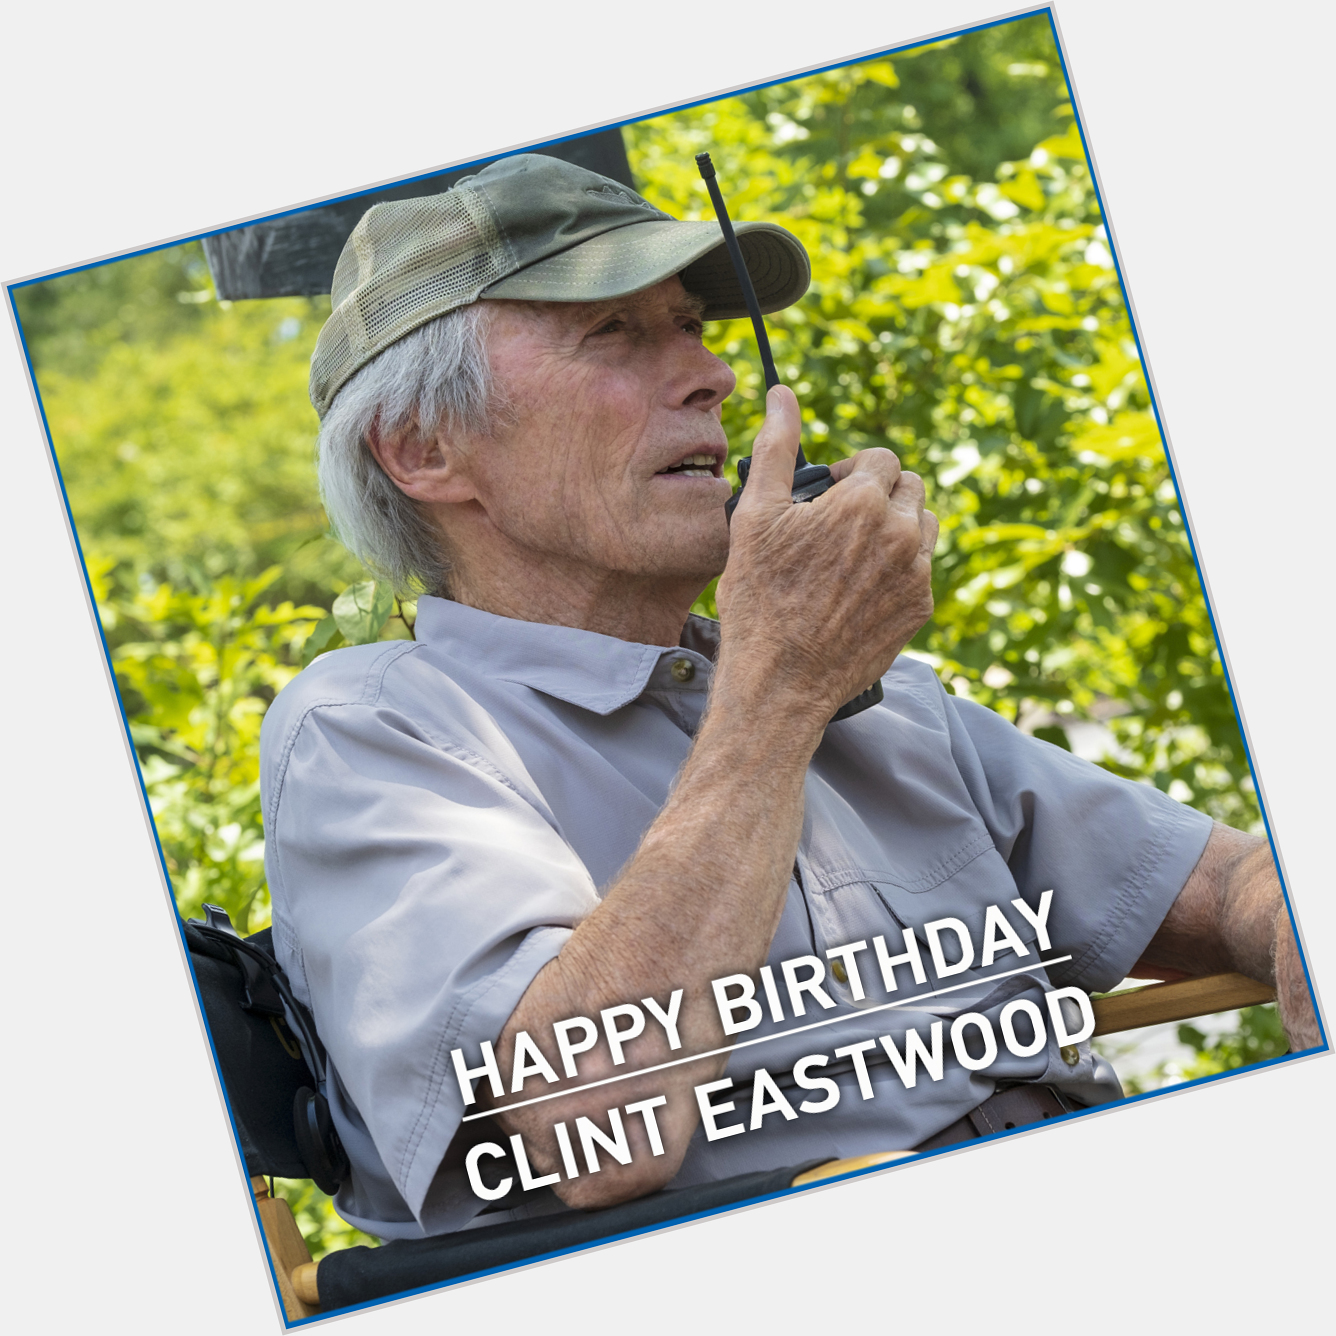 Happy Birthday to the Iconic Academy Award winning director Clint Eastwood whose next directorial is 